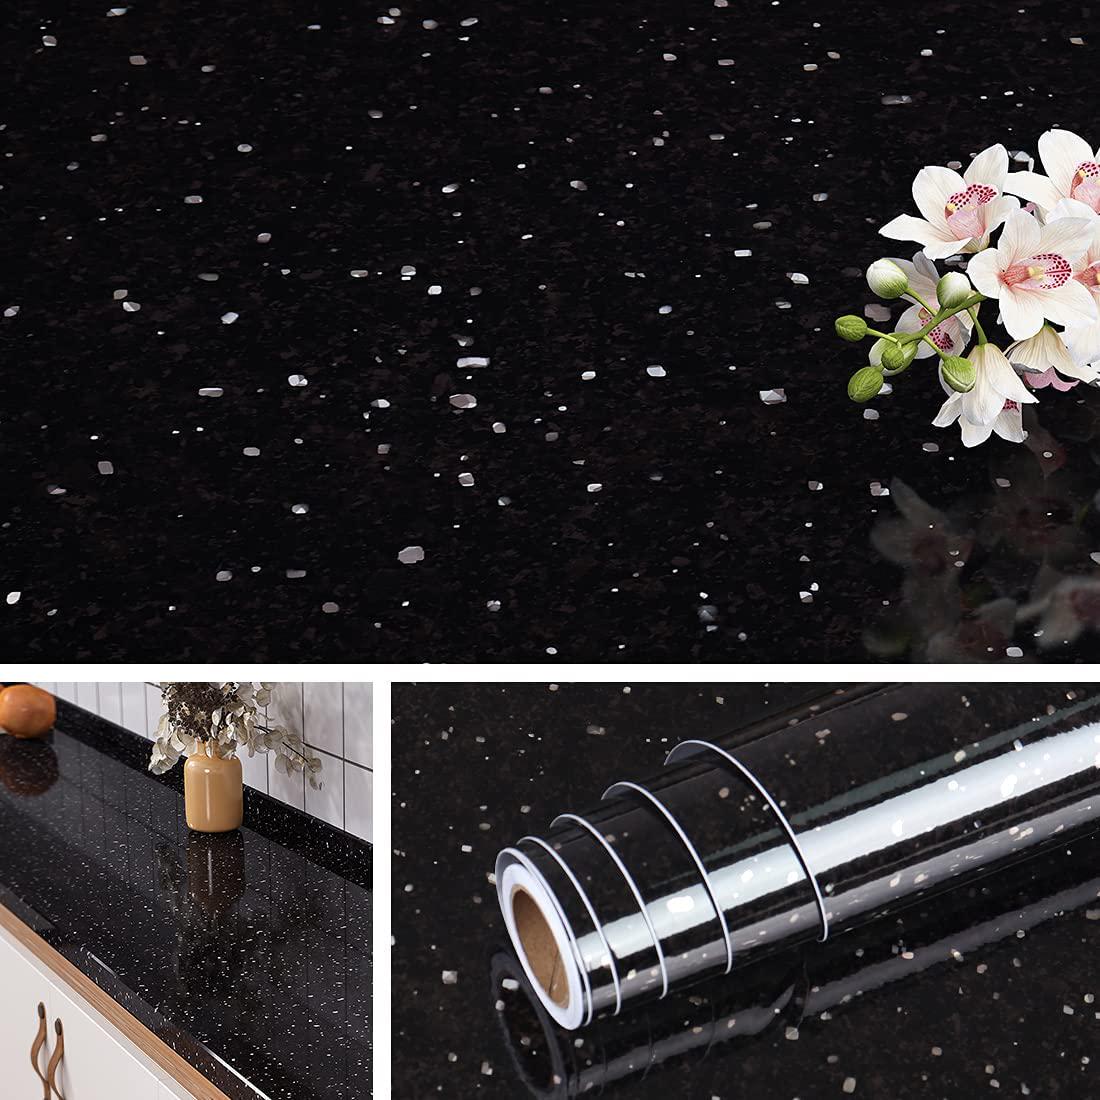 Livelynine, Livelynine 197 X 36 Inch Wide Contact Paper Black Galaxy Granite Countertop Peel and Stick Waterproof Stick on Countertops Kitchen Wallpaper Marble Paper for Counter Covers Kitchen Island Desk